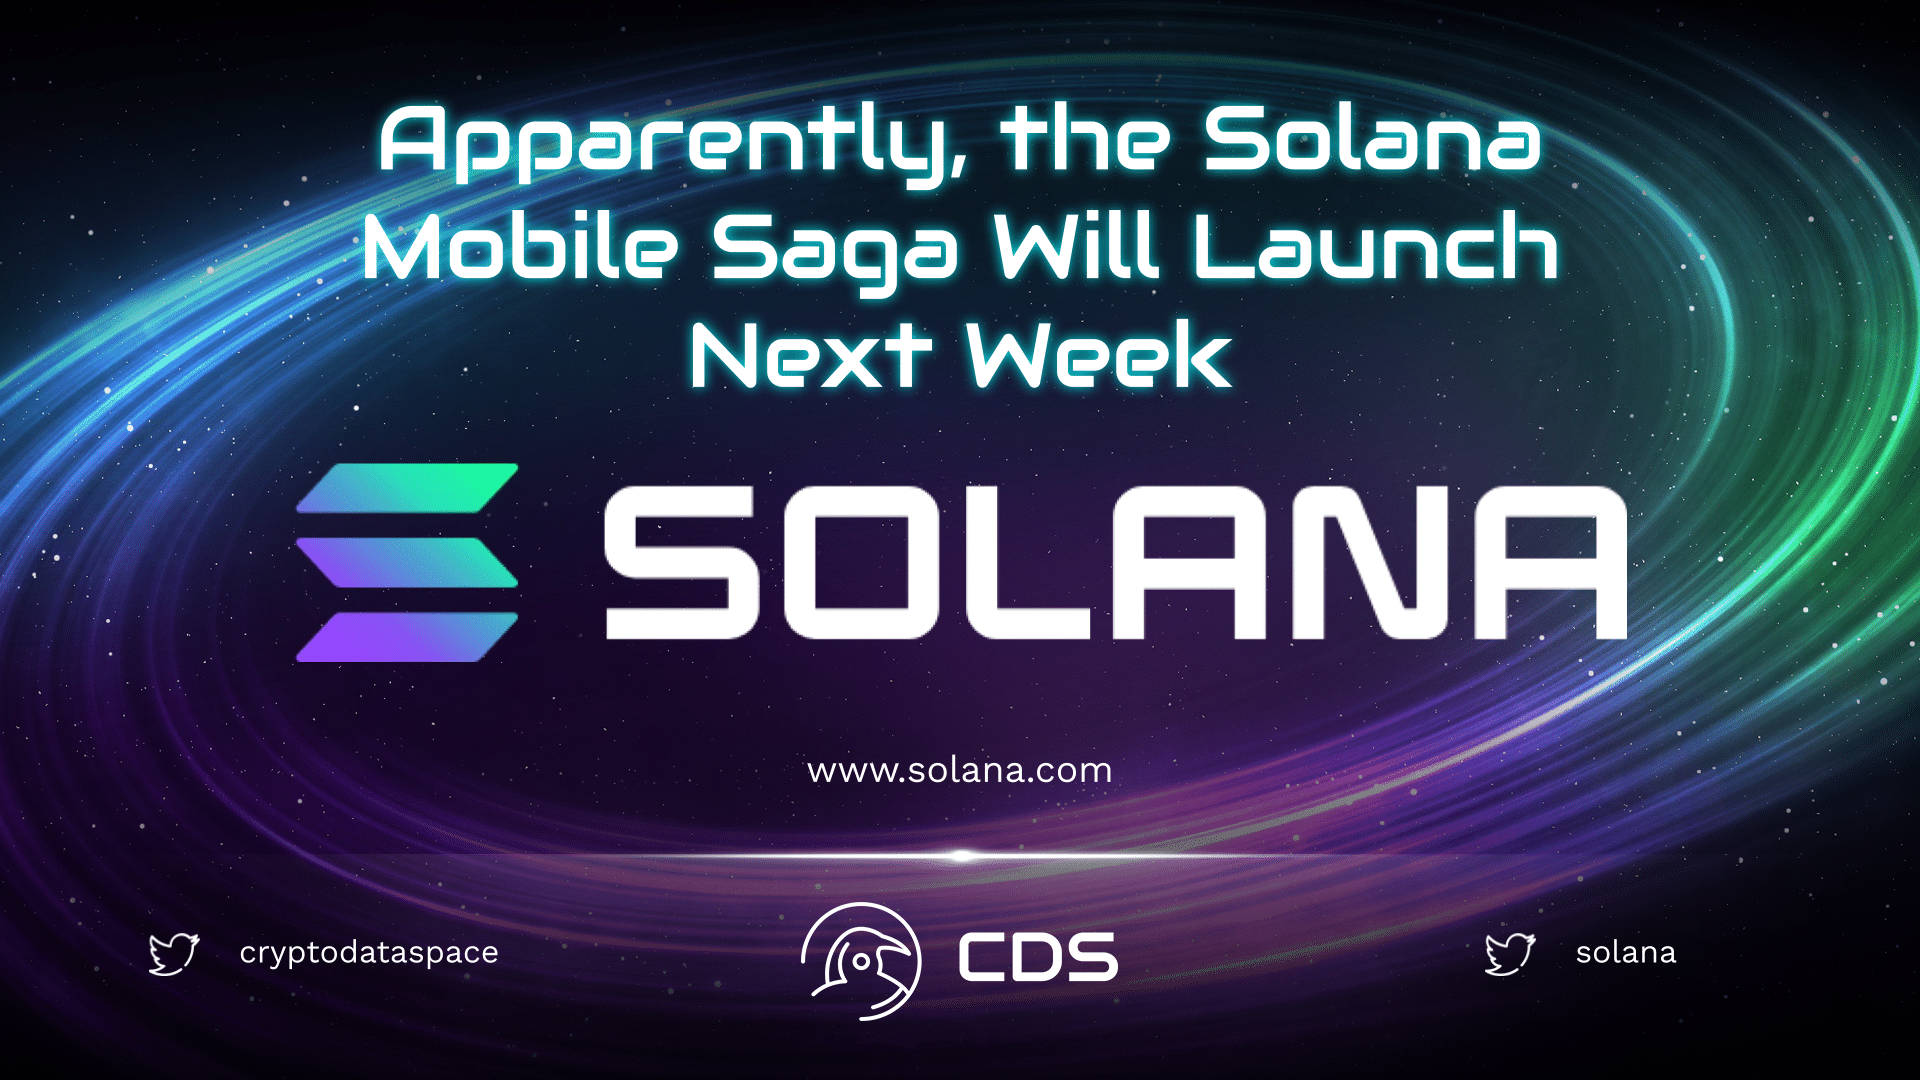 Apparently, the Solana Mobile Saga Will Launch Next Week